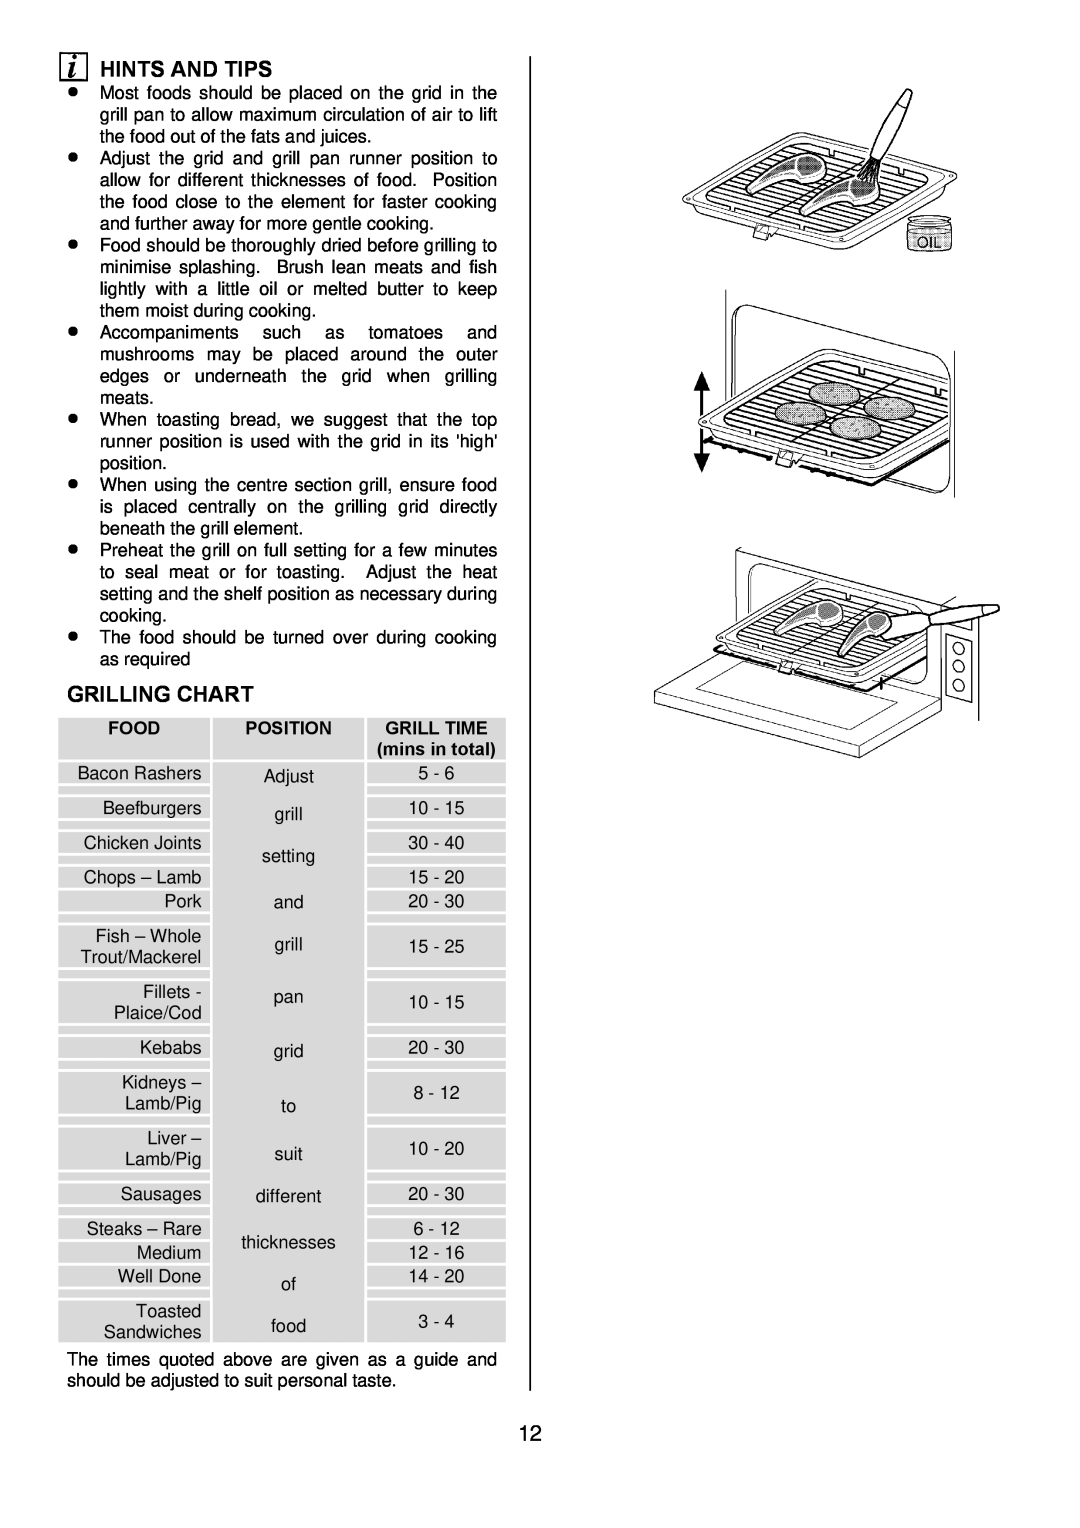 Zanussi ZUQ 875 manual Hints And Tips, Grilling Chart, Food, Position, Grill Time, mins in total 